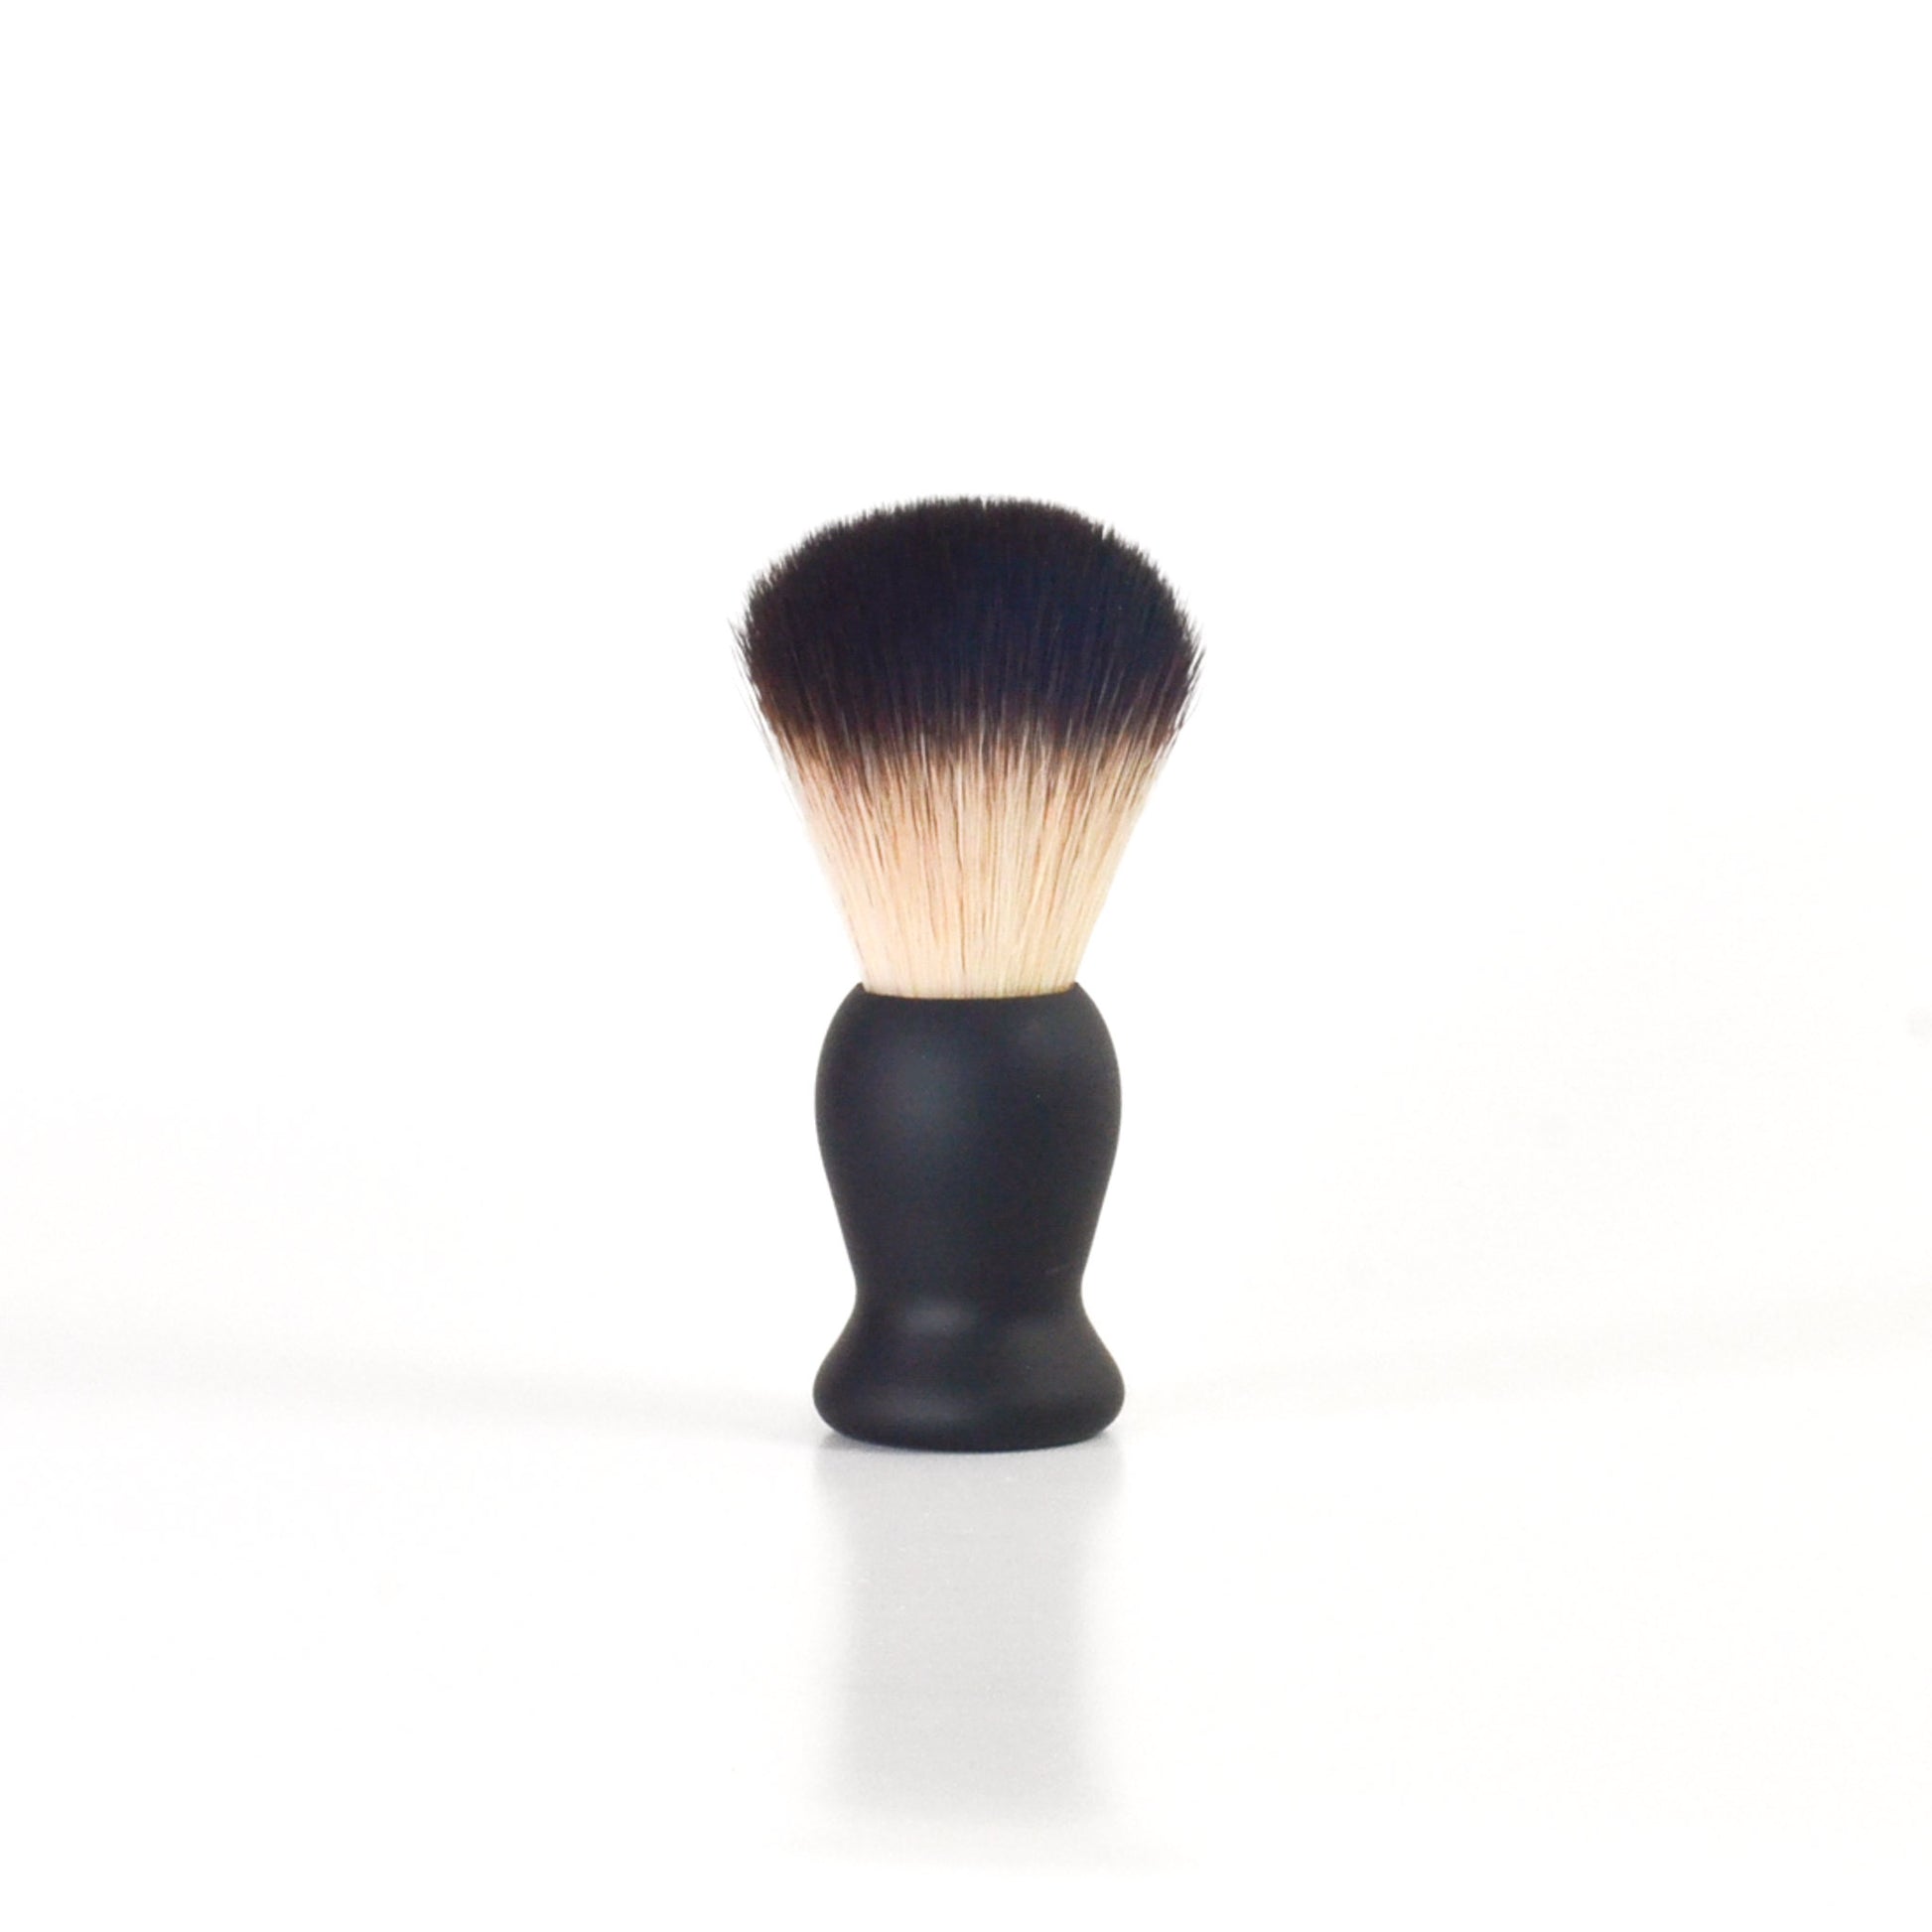 Super soft cruelty-free synthetic shaving lather brush